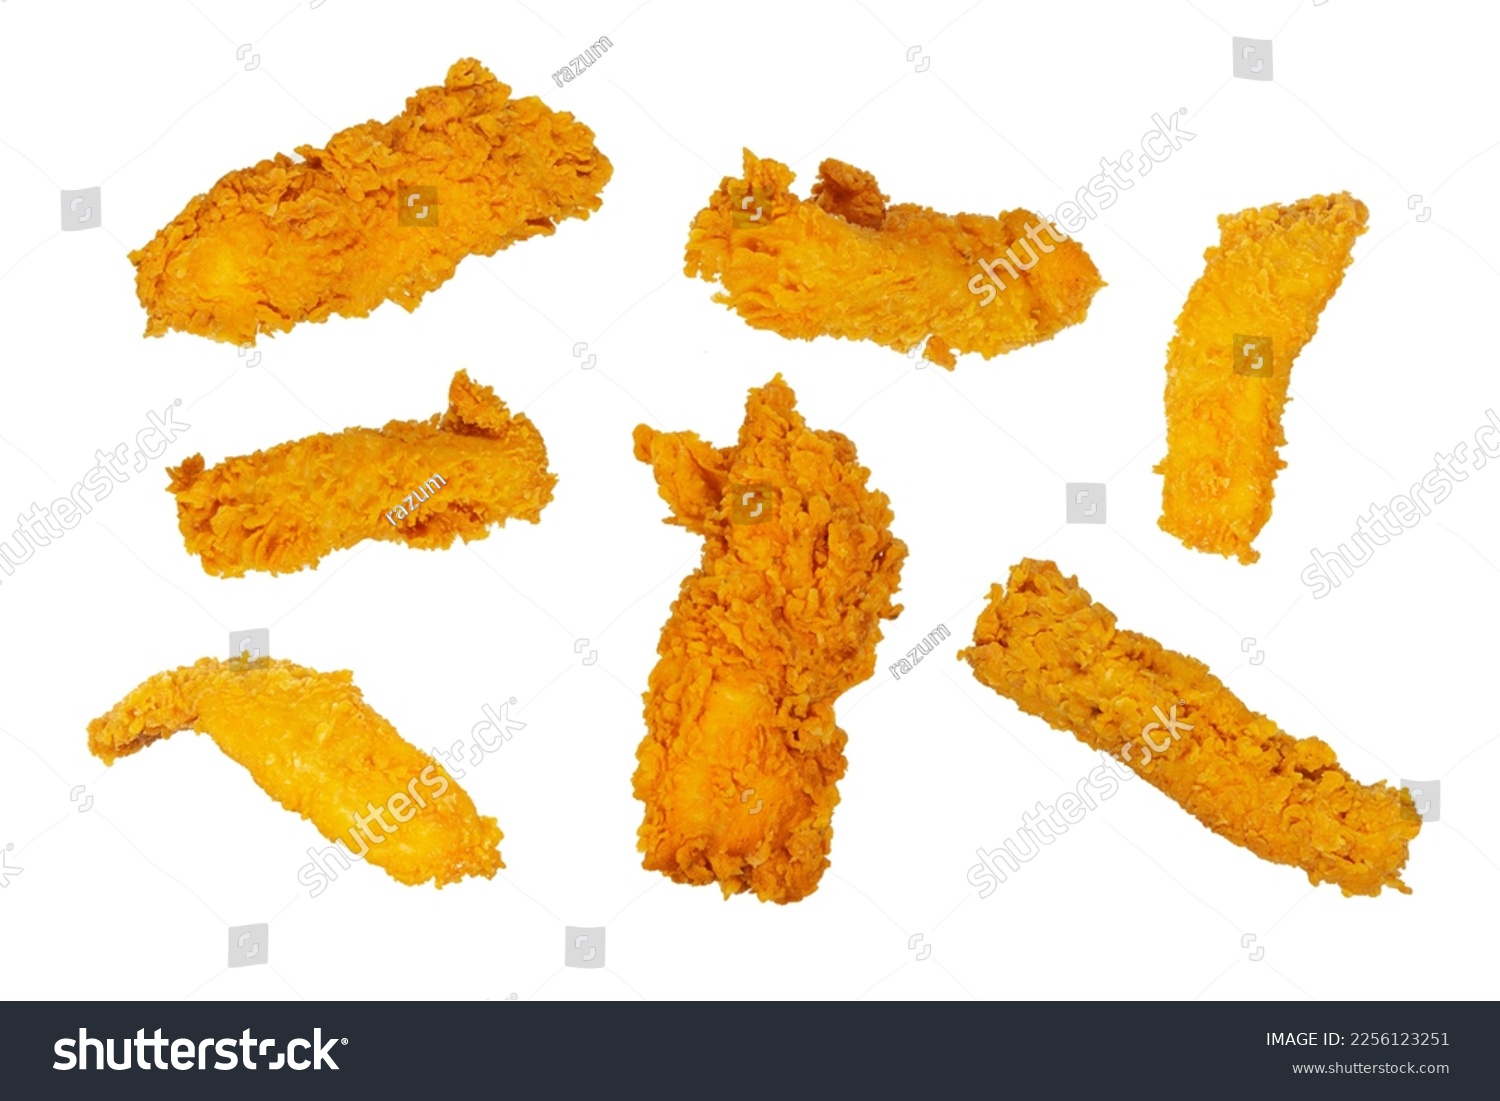 Golden fried chicken strips in different angles isolated on a white background.  #2256123251